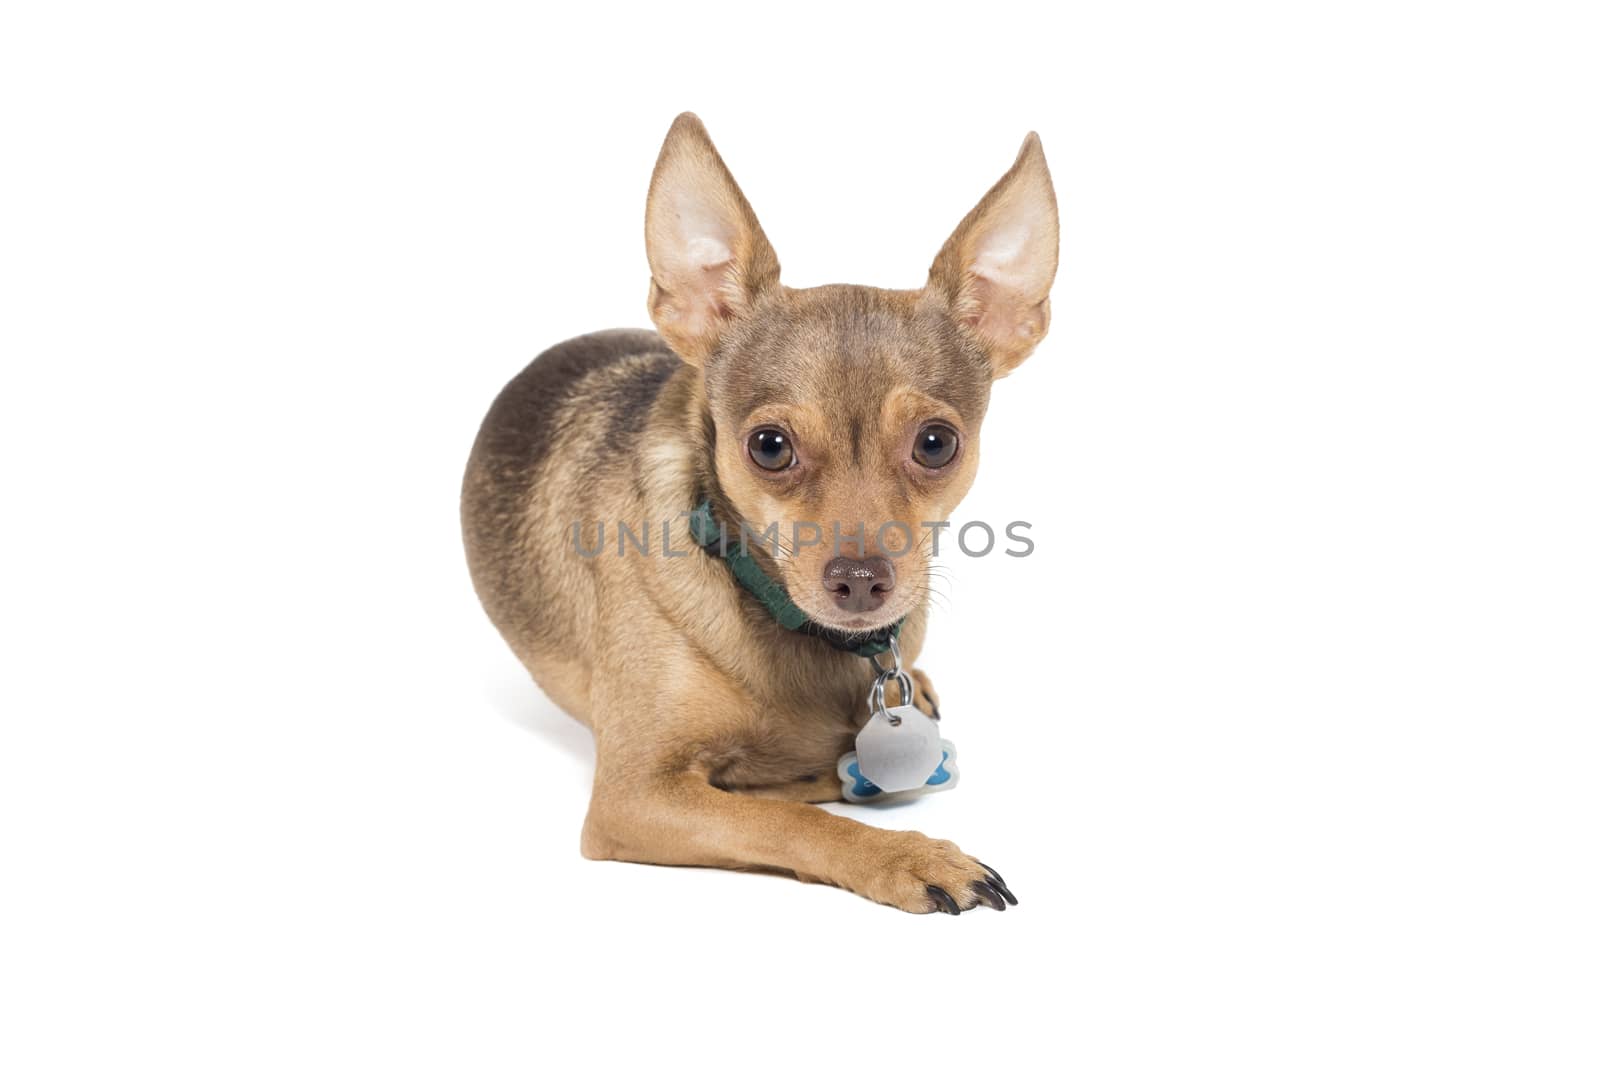 Chihuahua dog isolated against a white background